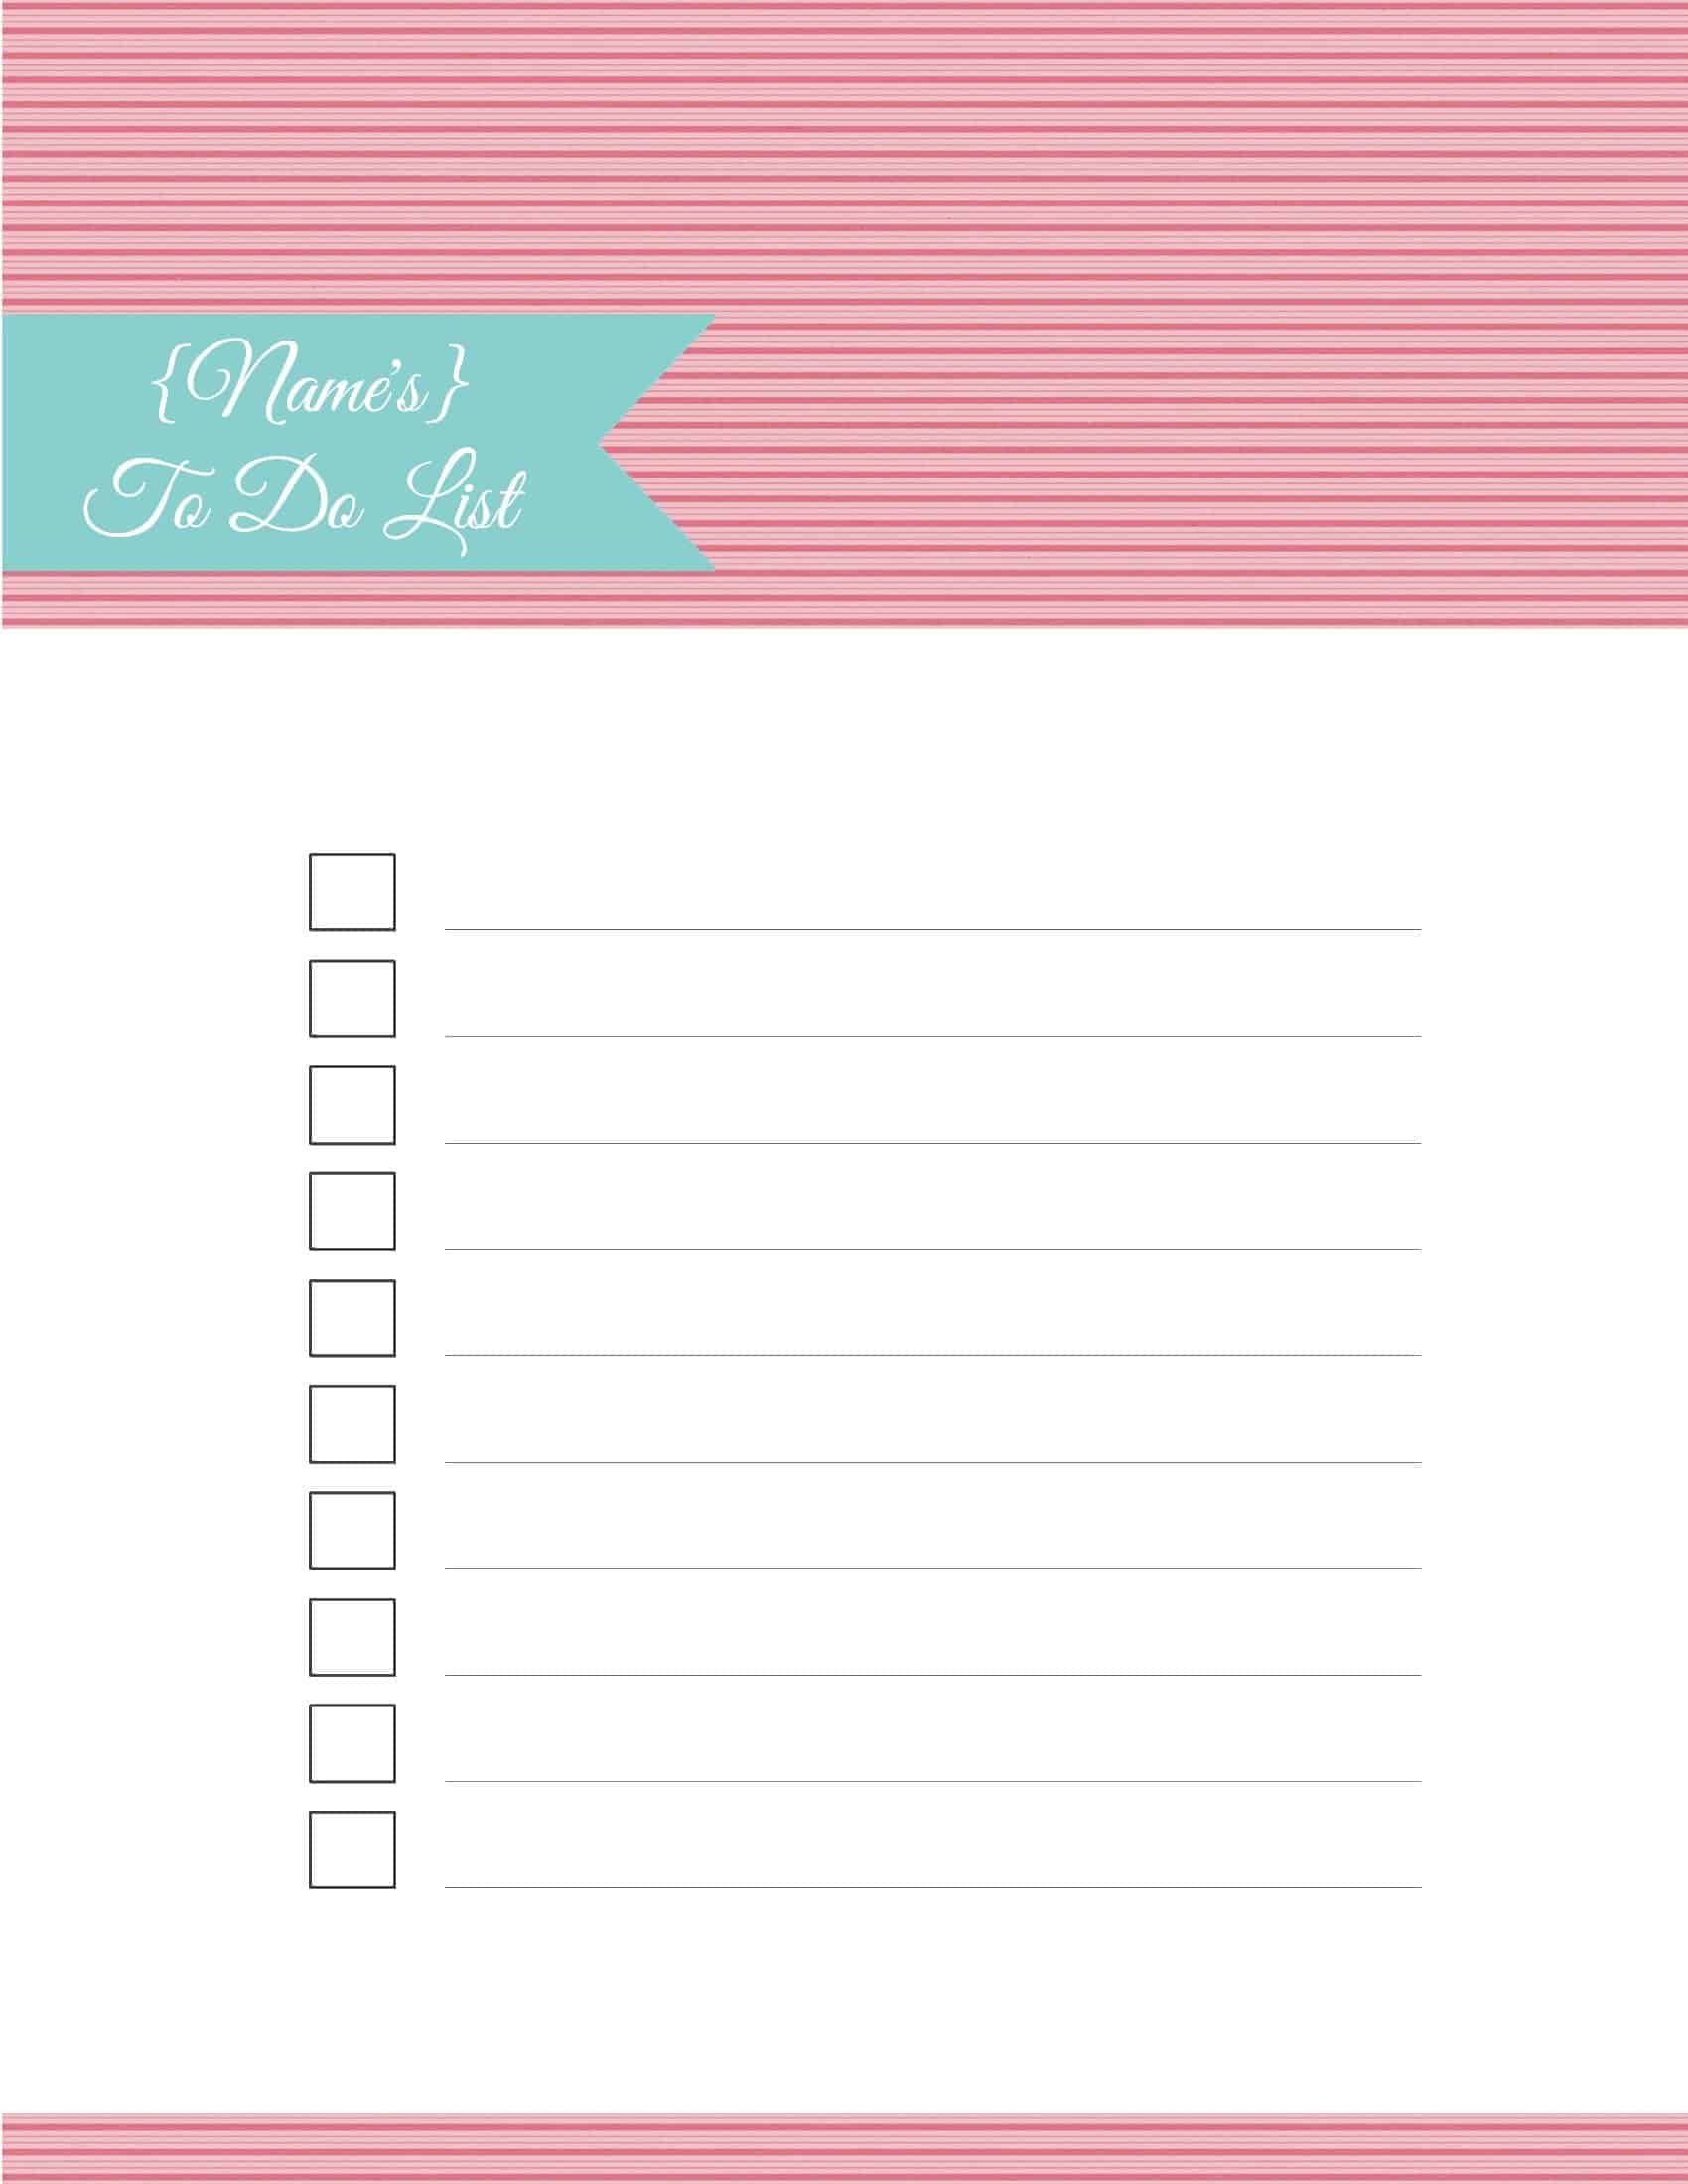 free-printable-to-do-list-print-or-use-online-access-from-anywhere